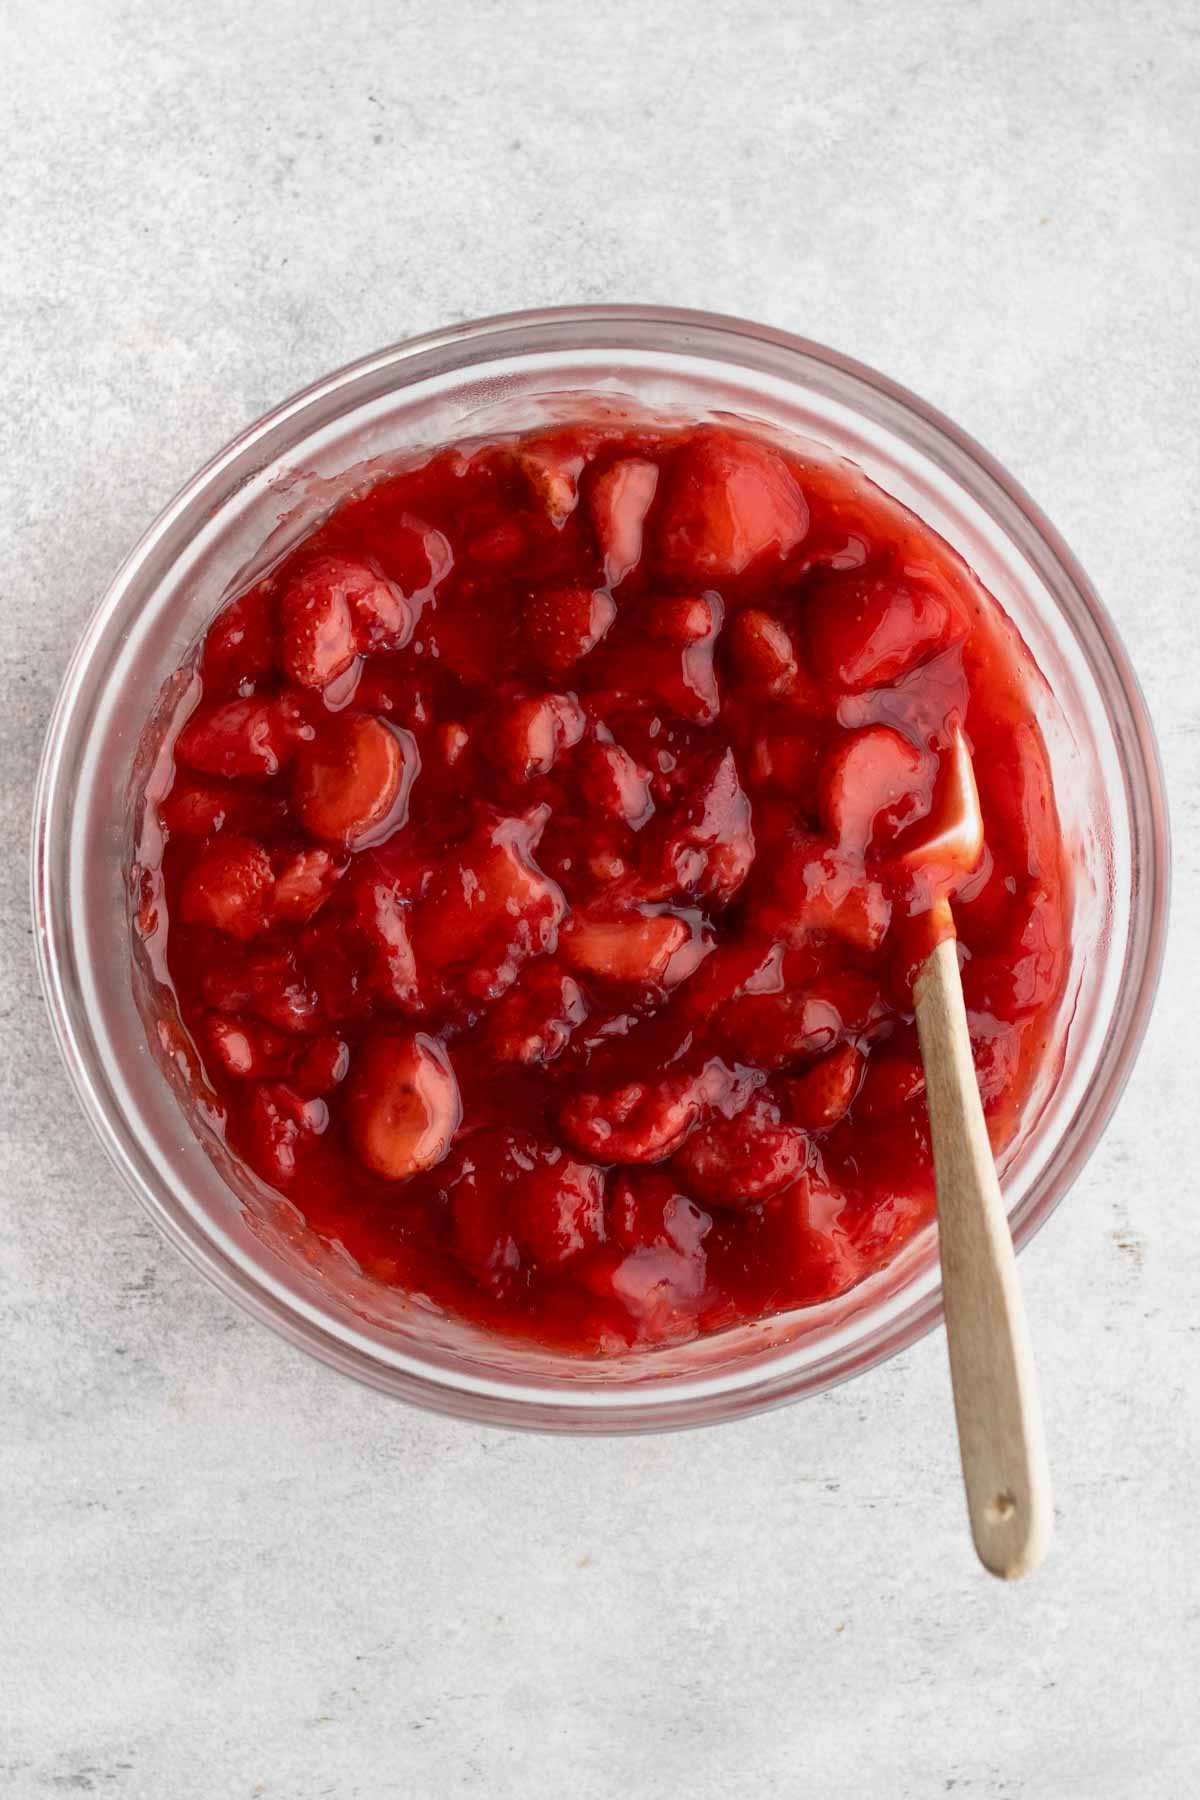 Strawberry Sauce in a glass bowl.